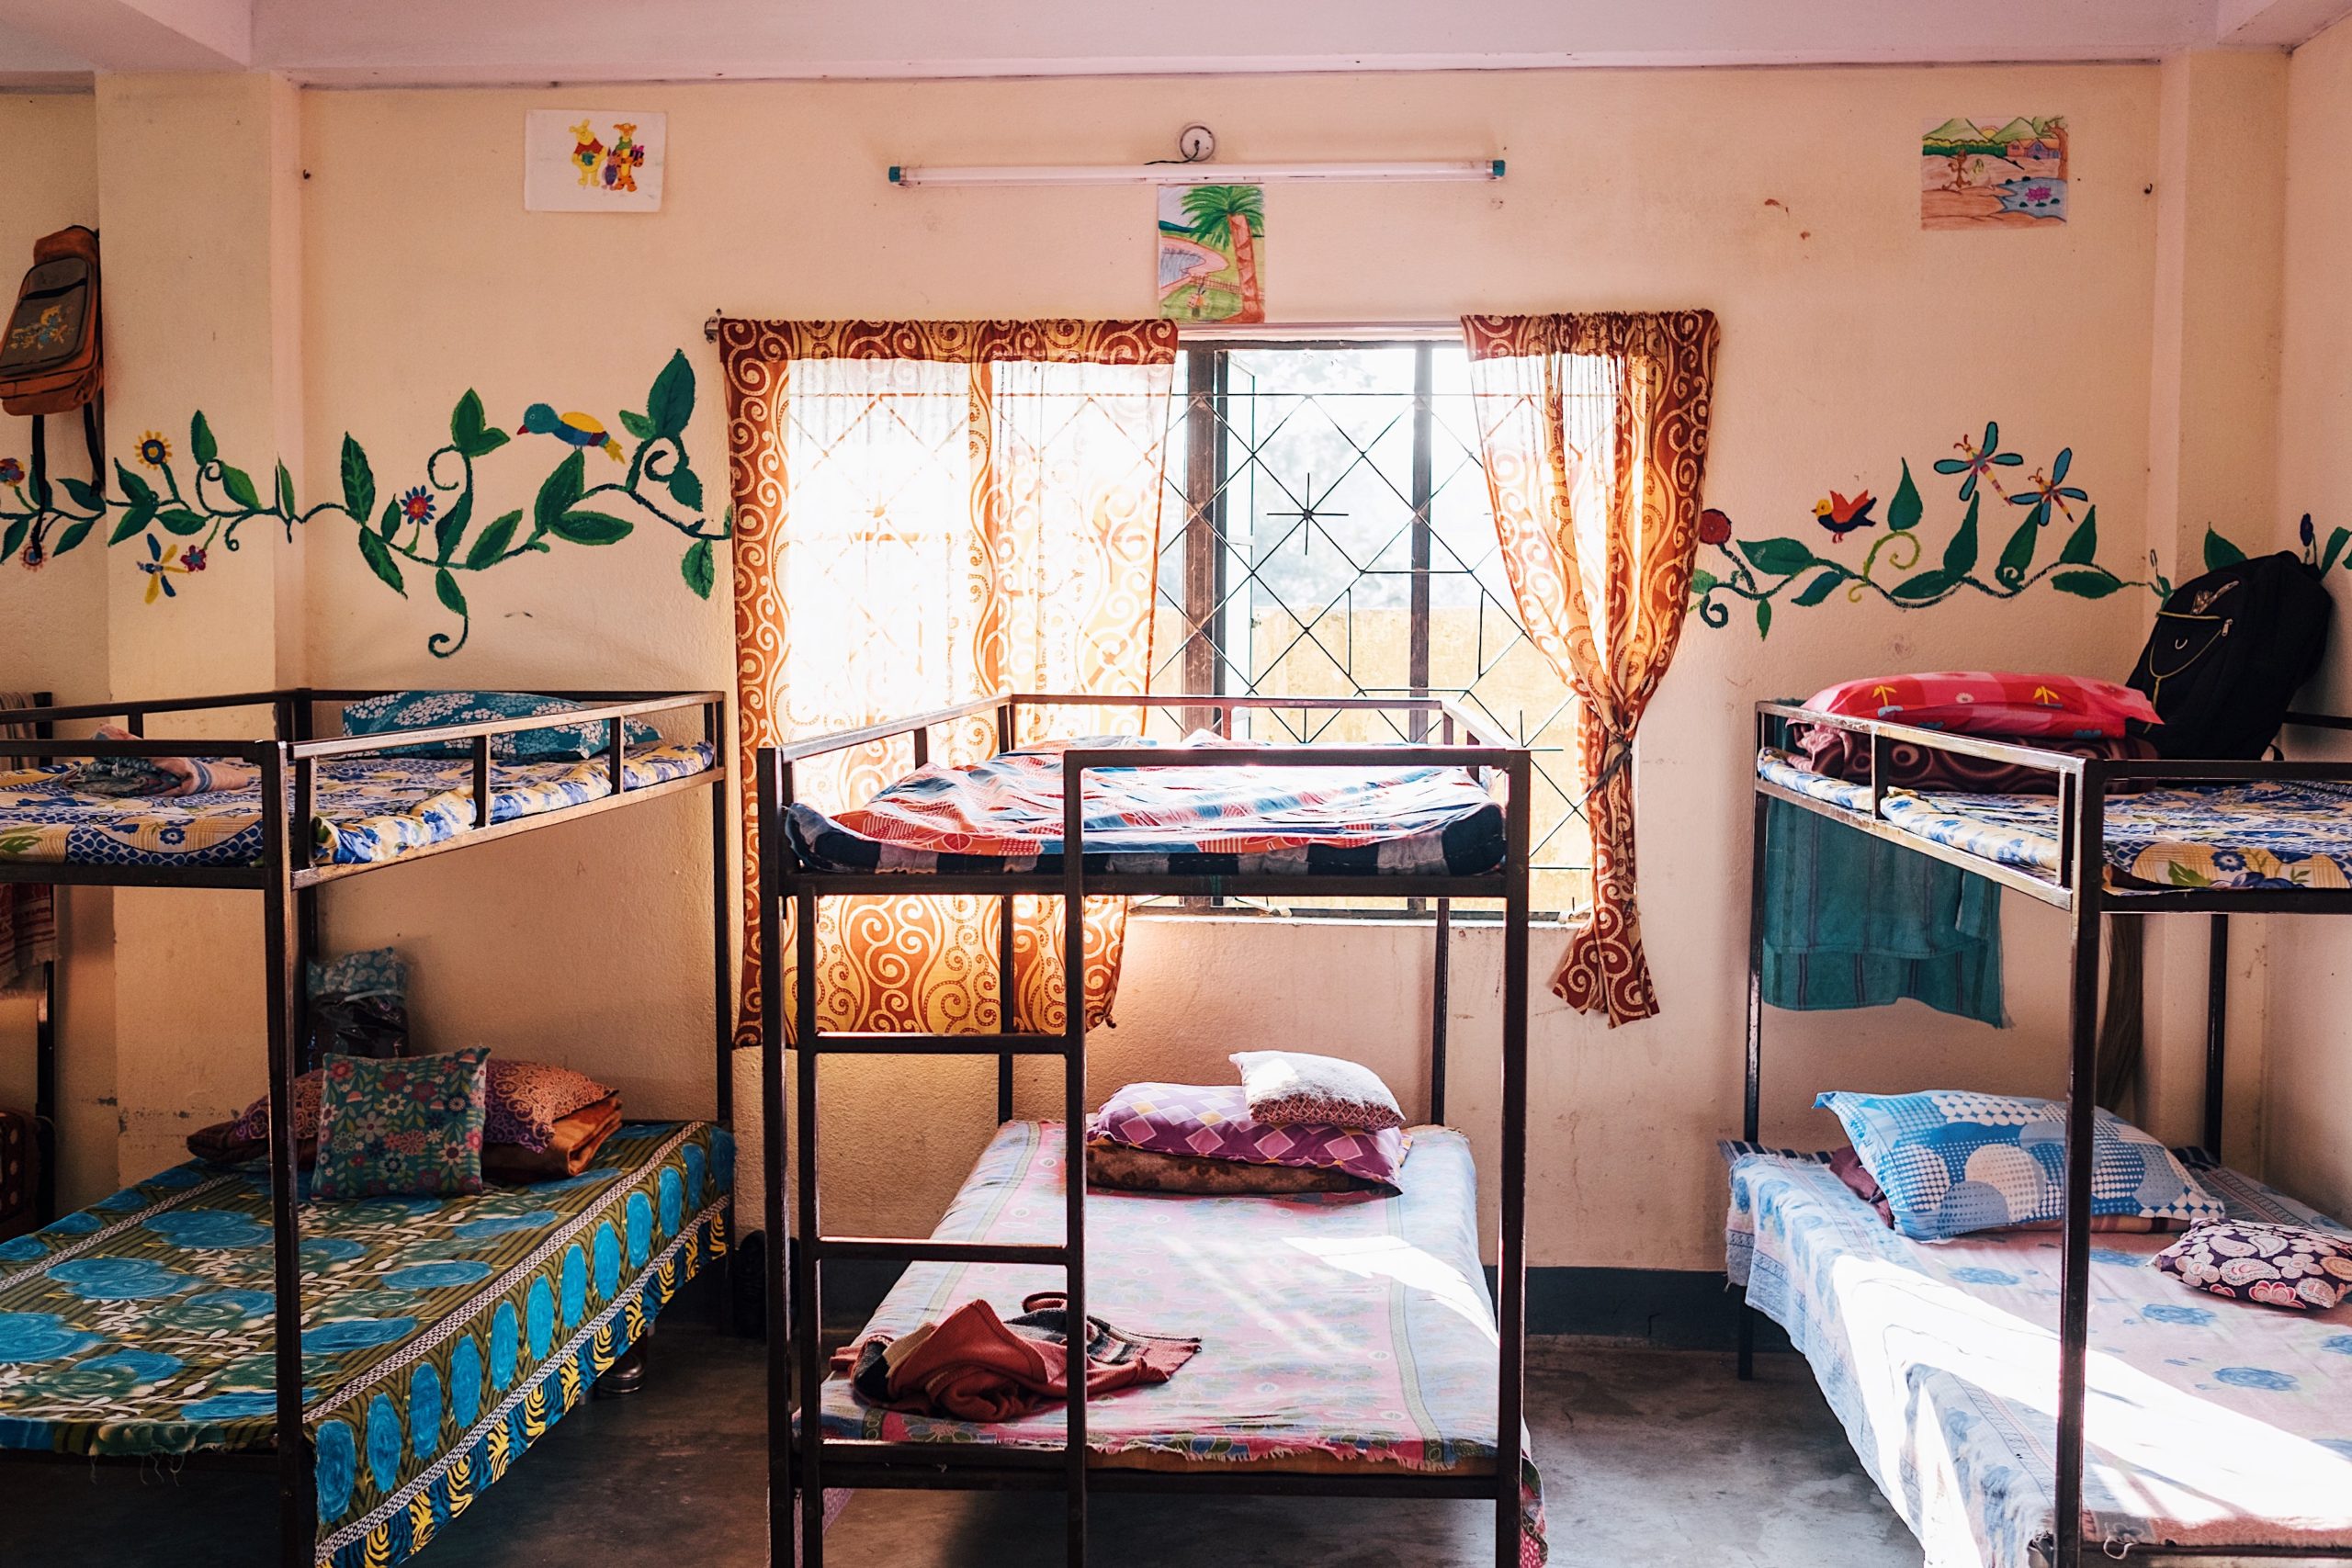 Beds and flower mural wall in shelter home in India